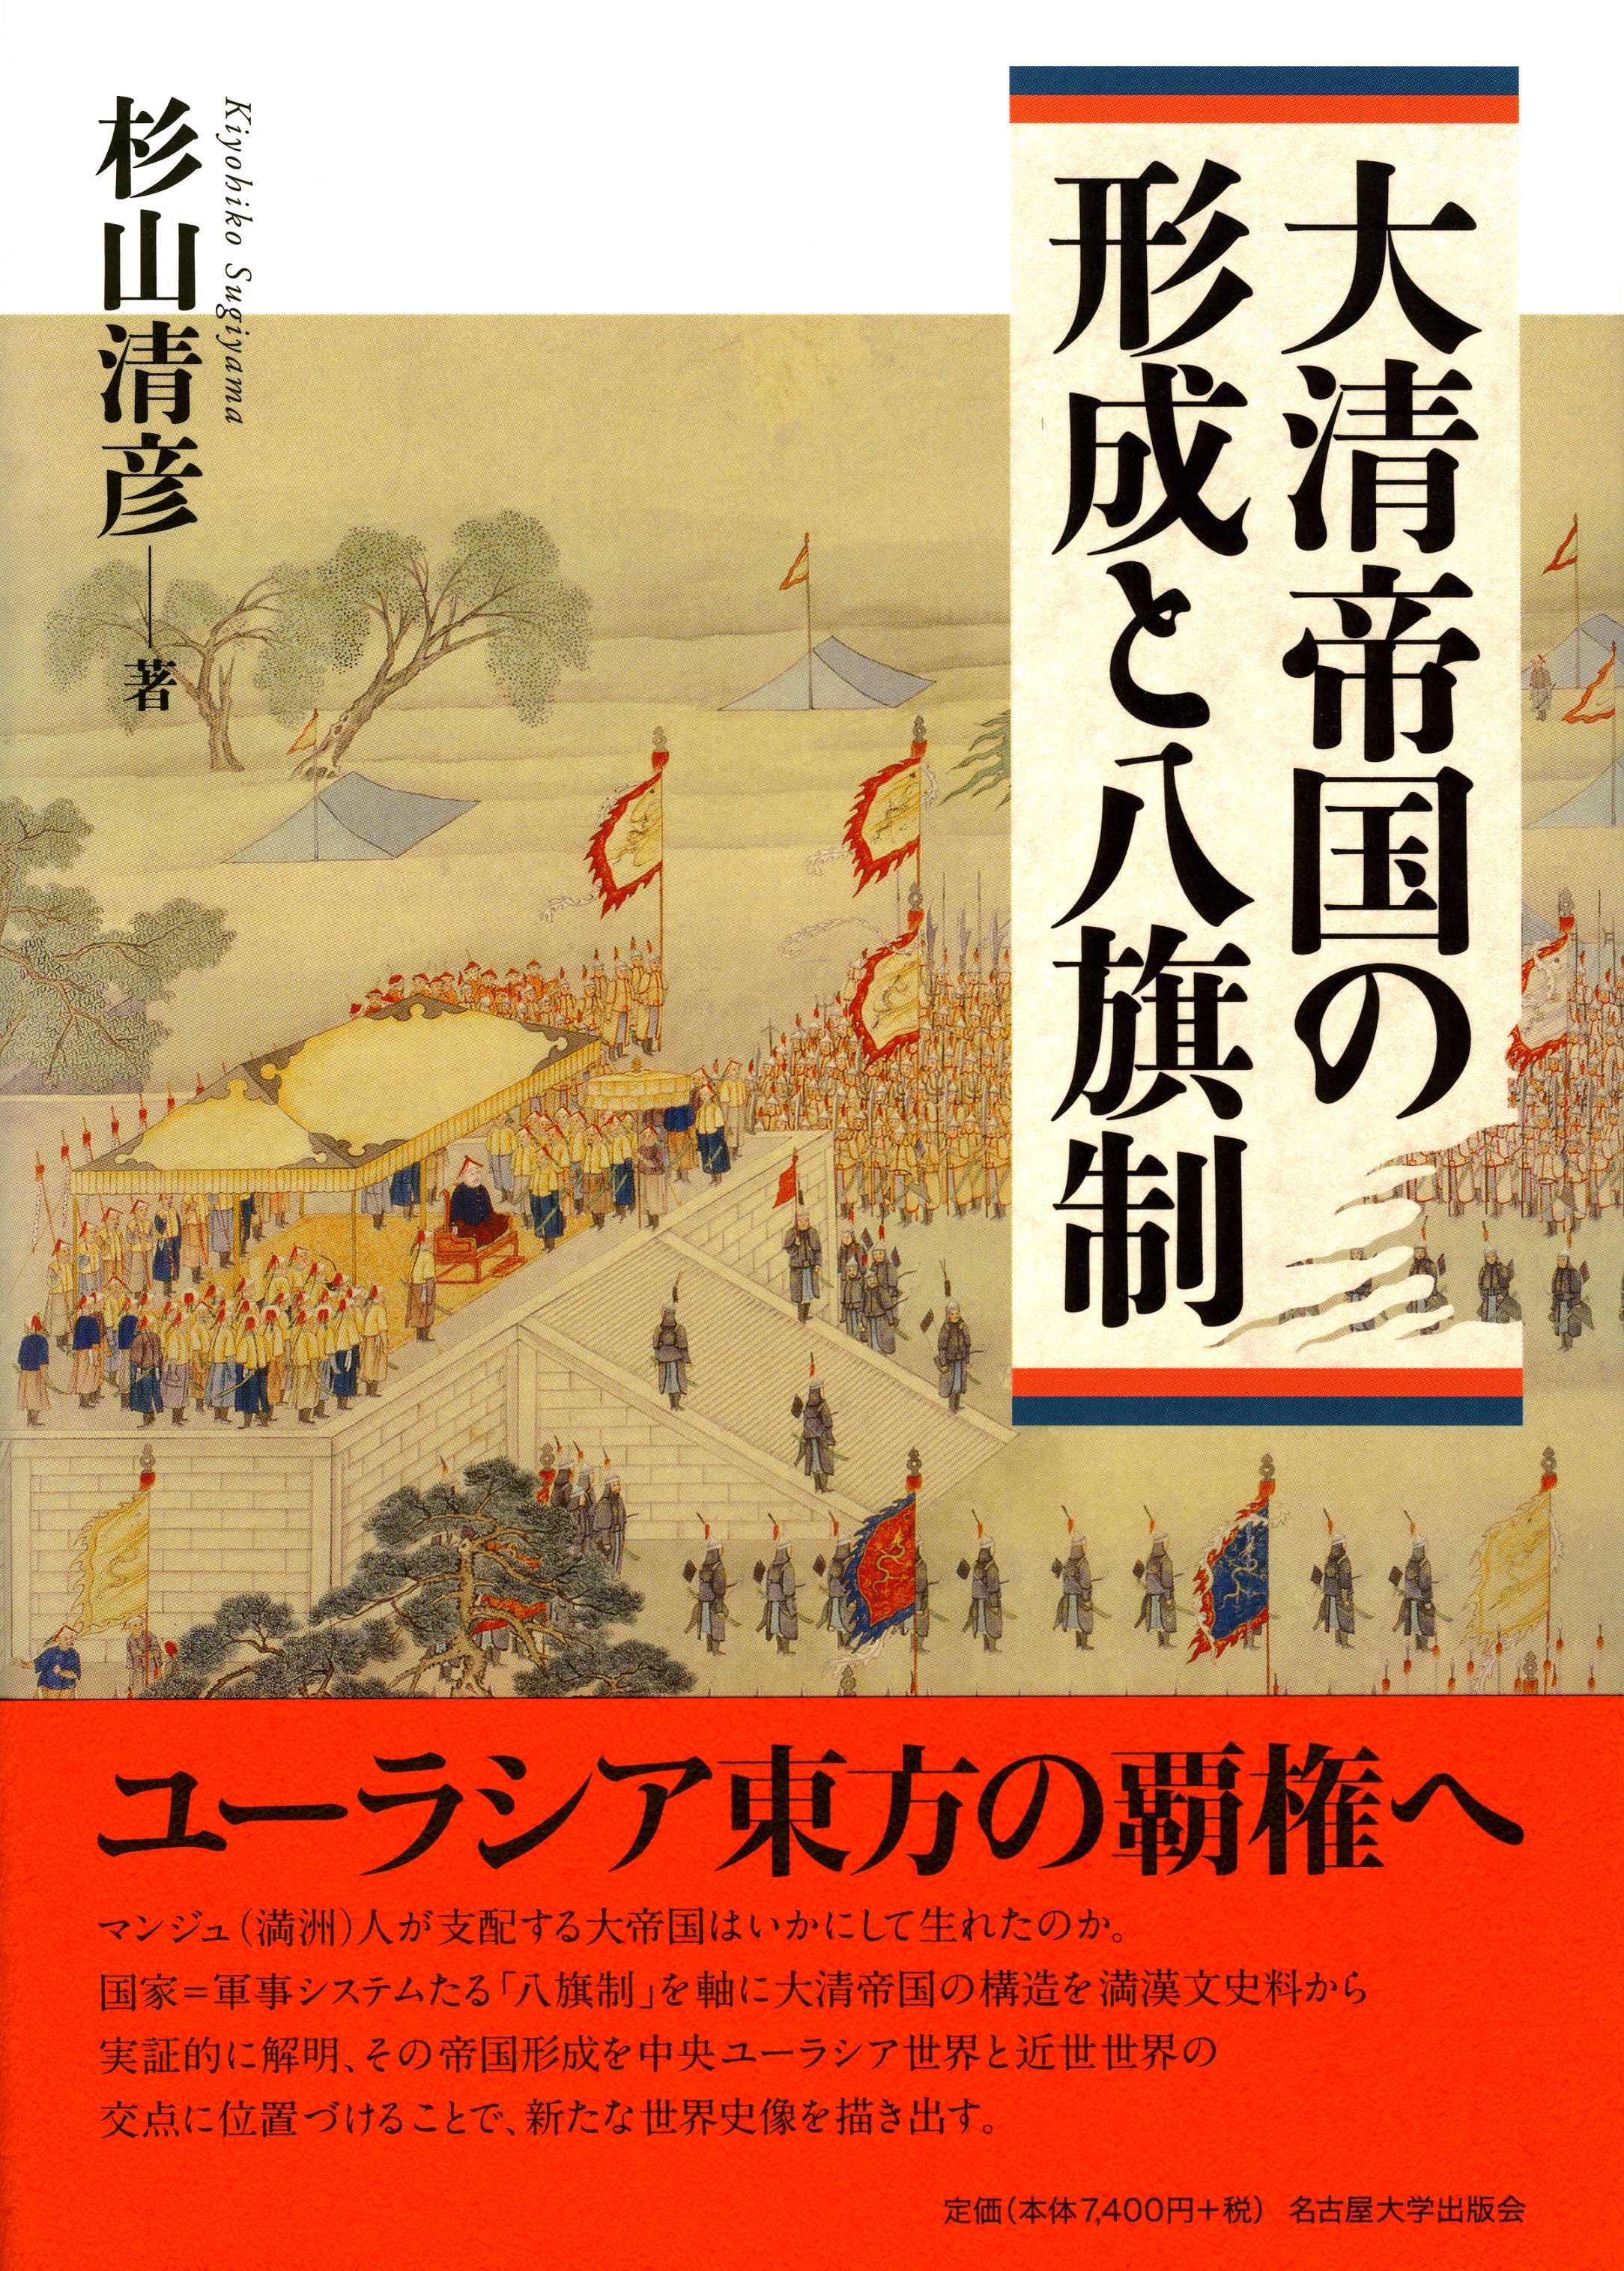 Cover with Illustration of Qing Empire